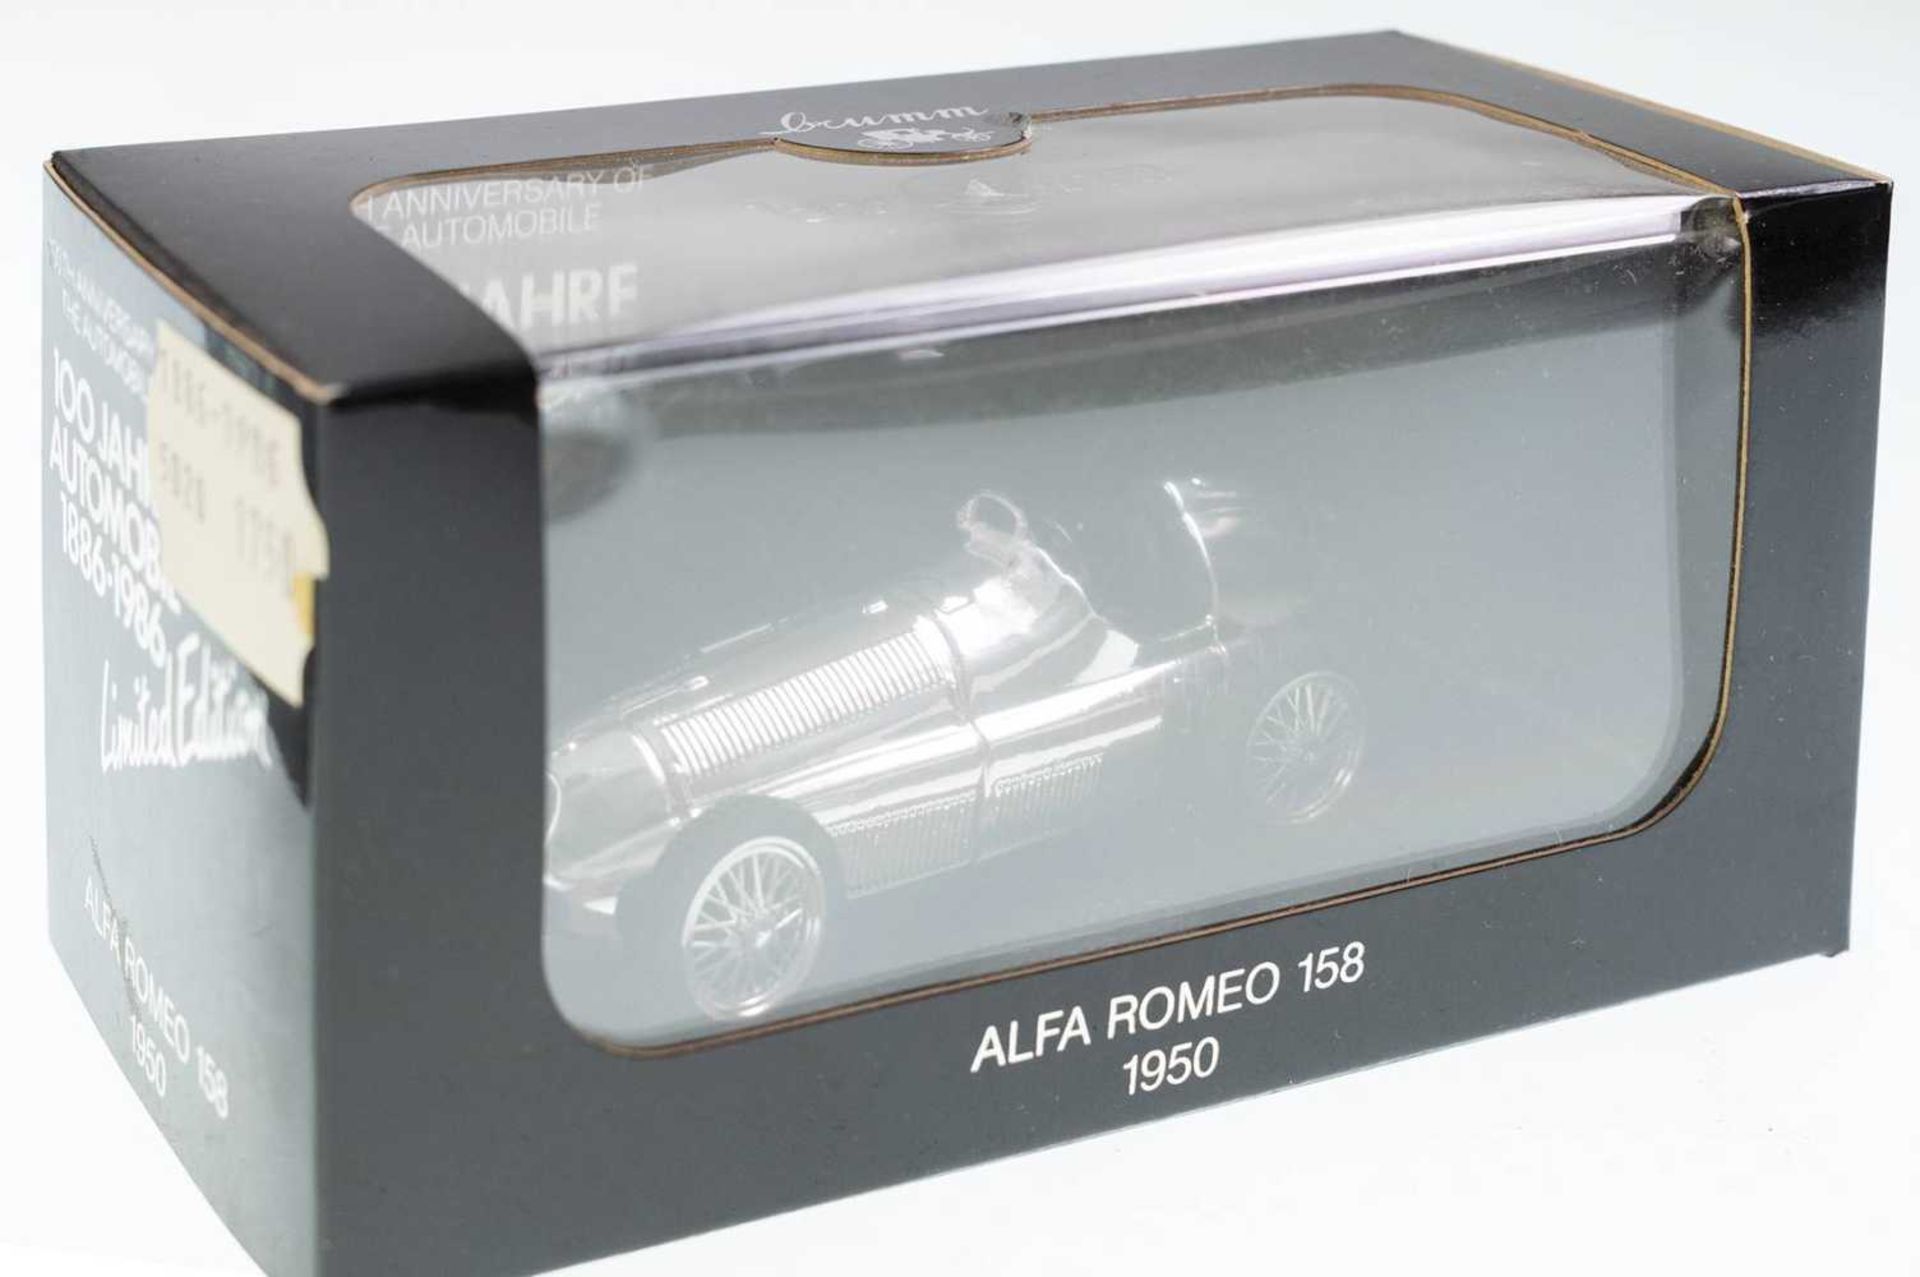 1886-1986, chromic set, 5 various models with Alfa romeo 158, Our Lady of Ransom W 125, Ferrari 375 - Image 2 of 2